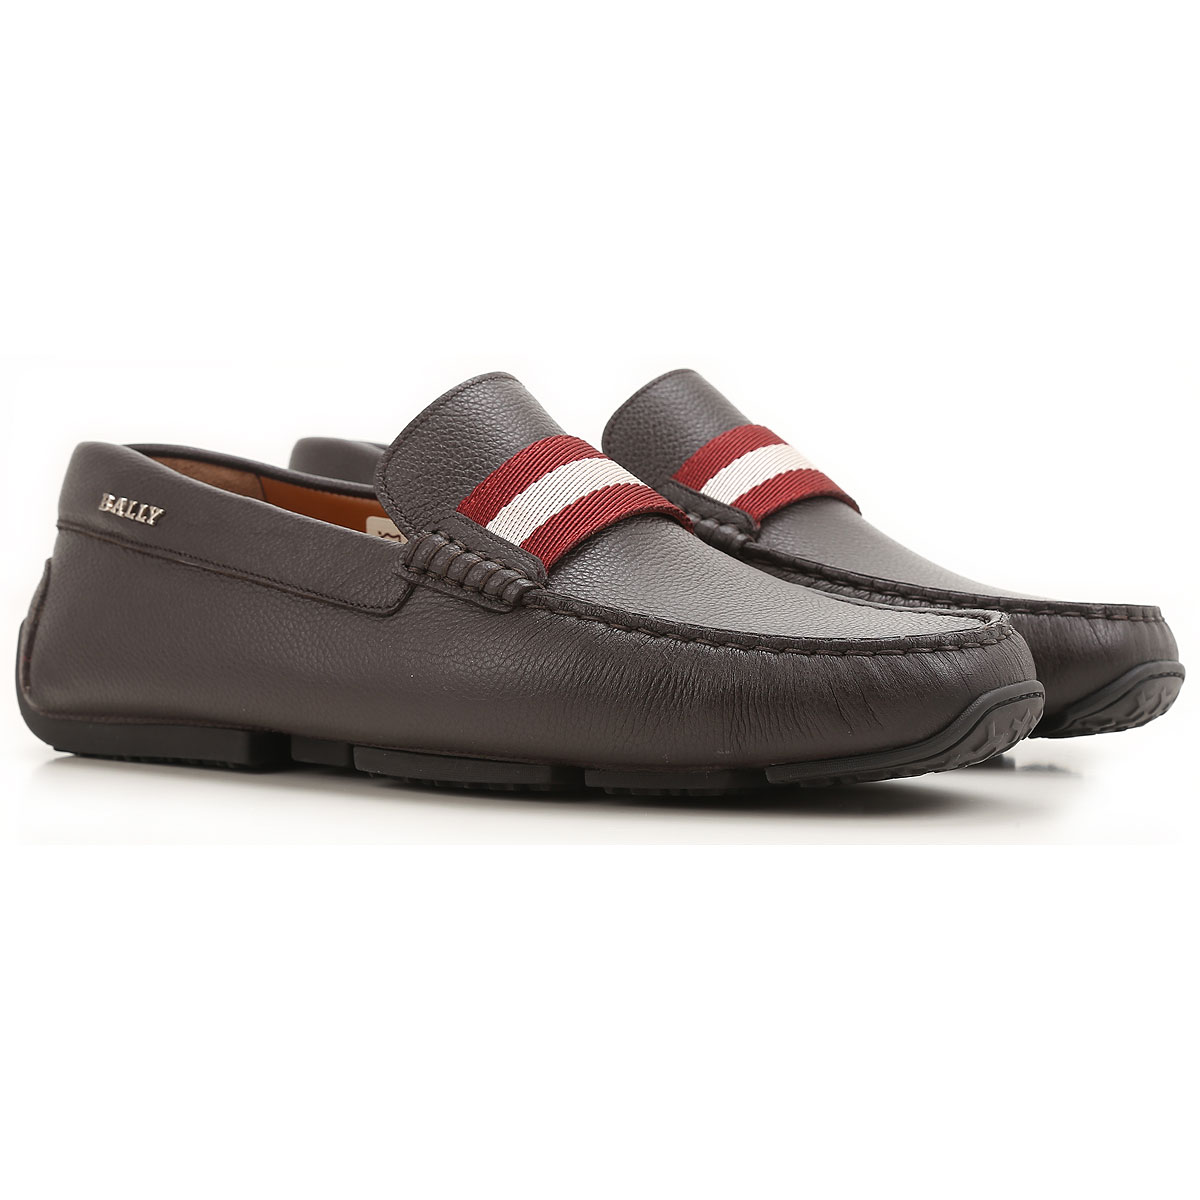 Mens Shoes Bally, Style code: pearce-341-